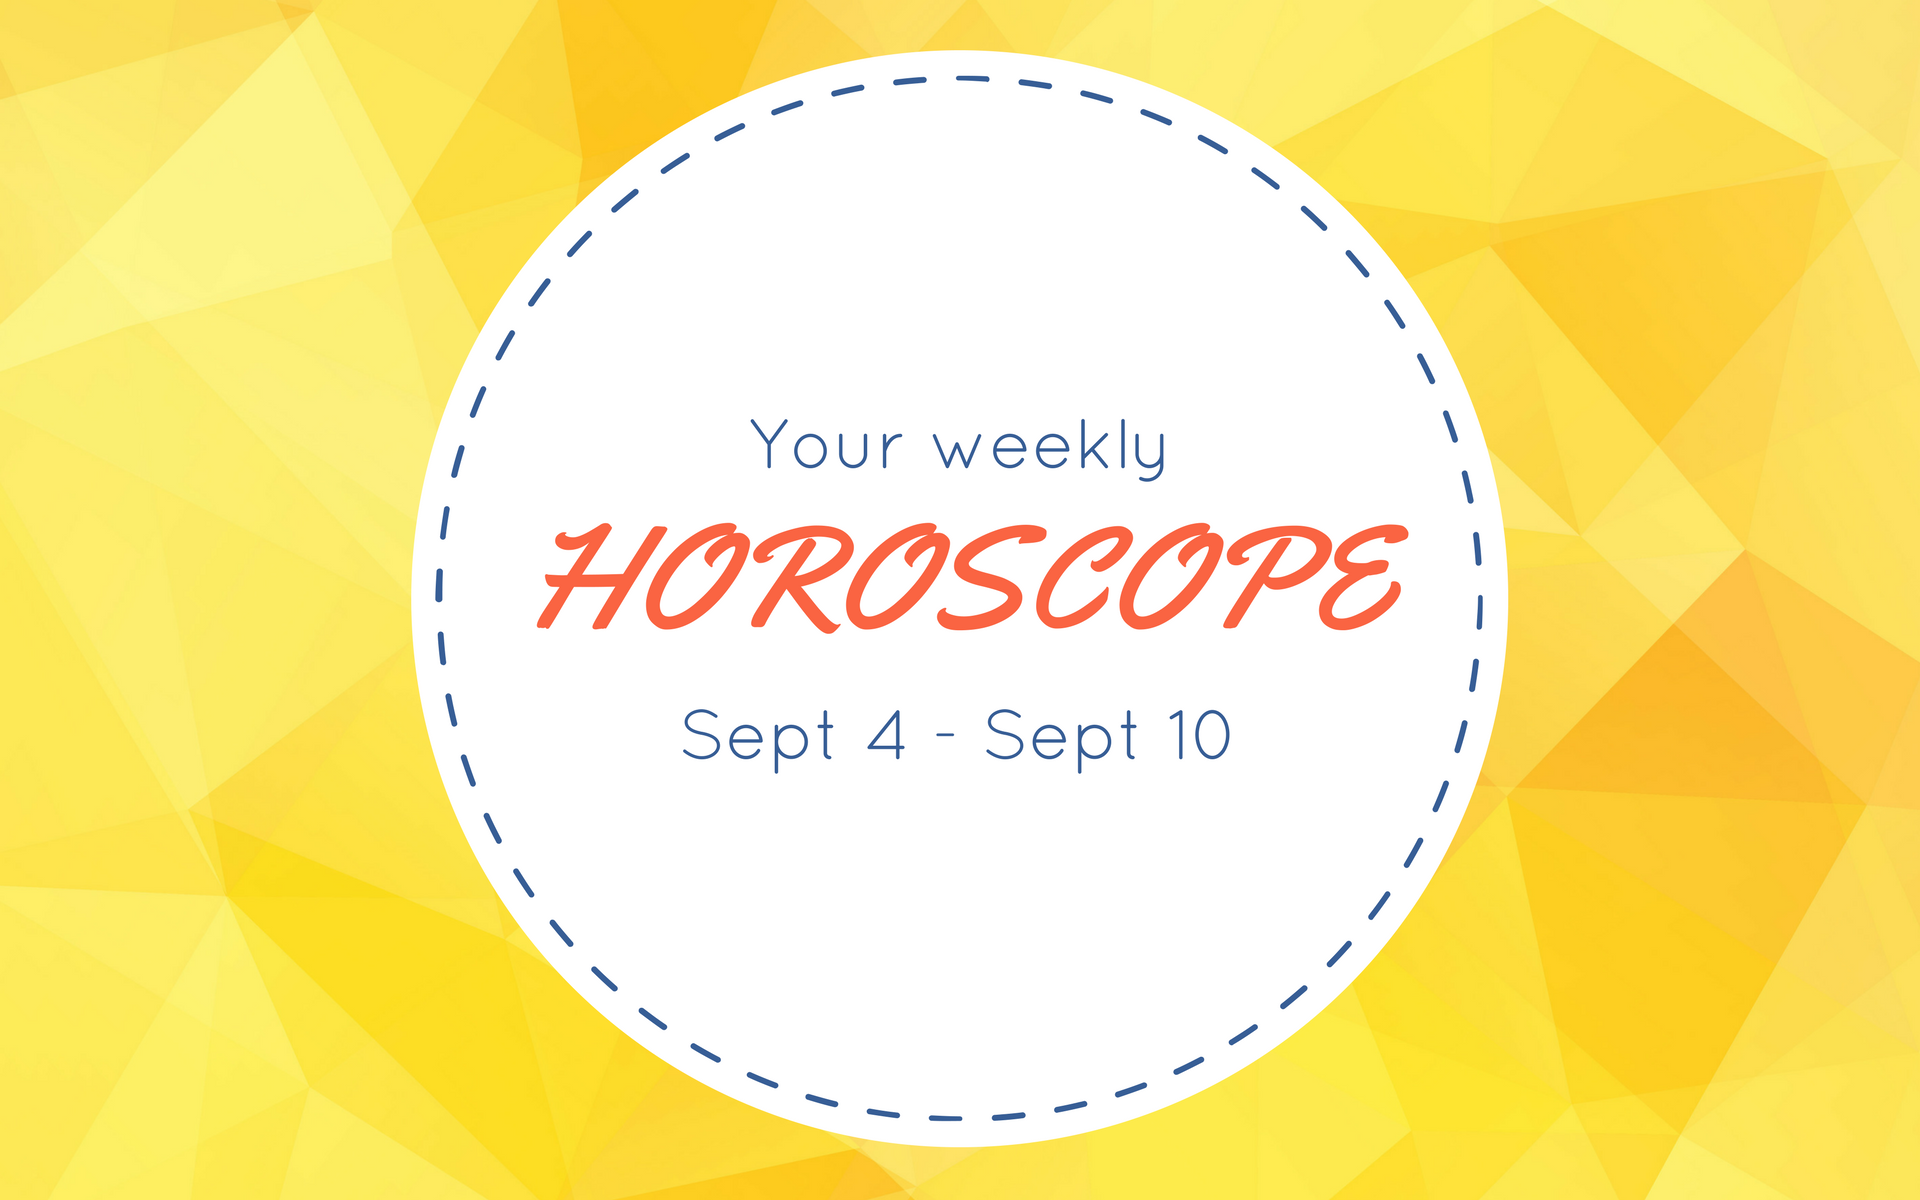 Your Weekly Horoscope: Sept 4 - Sept 10